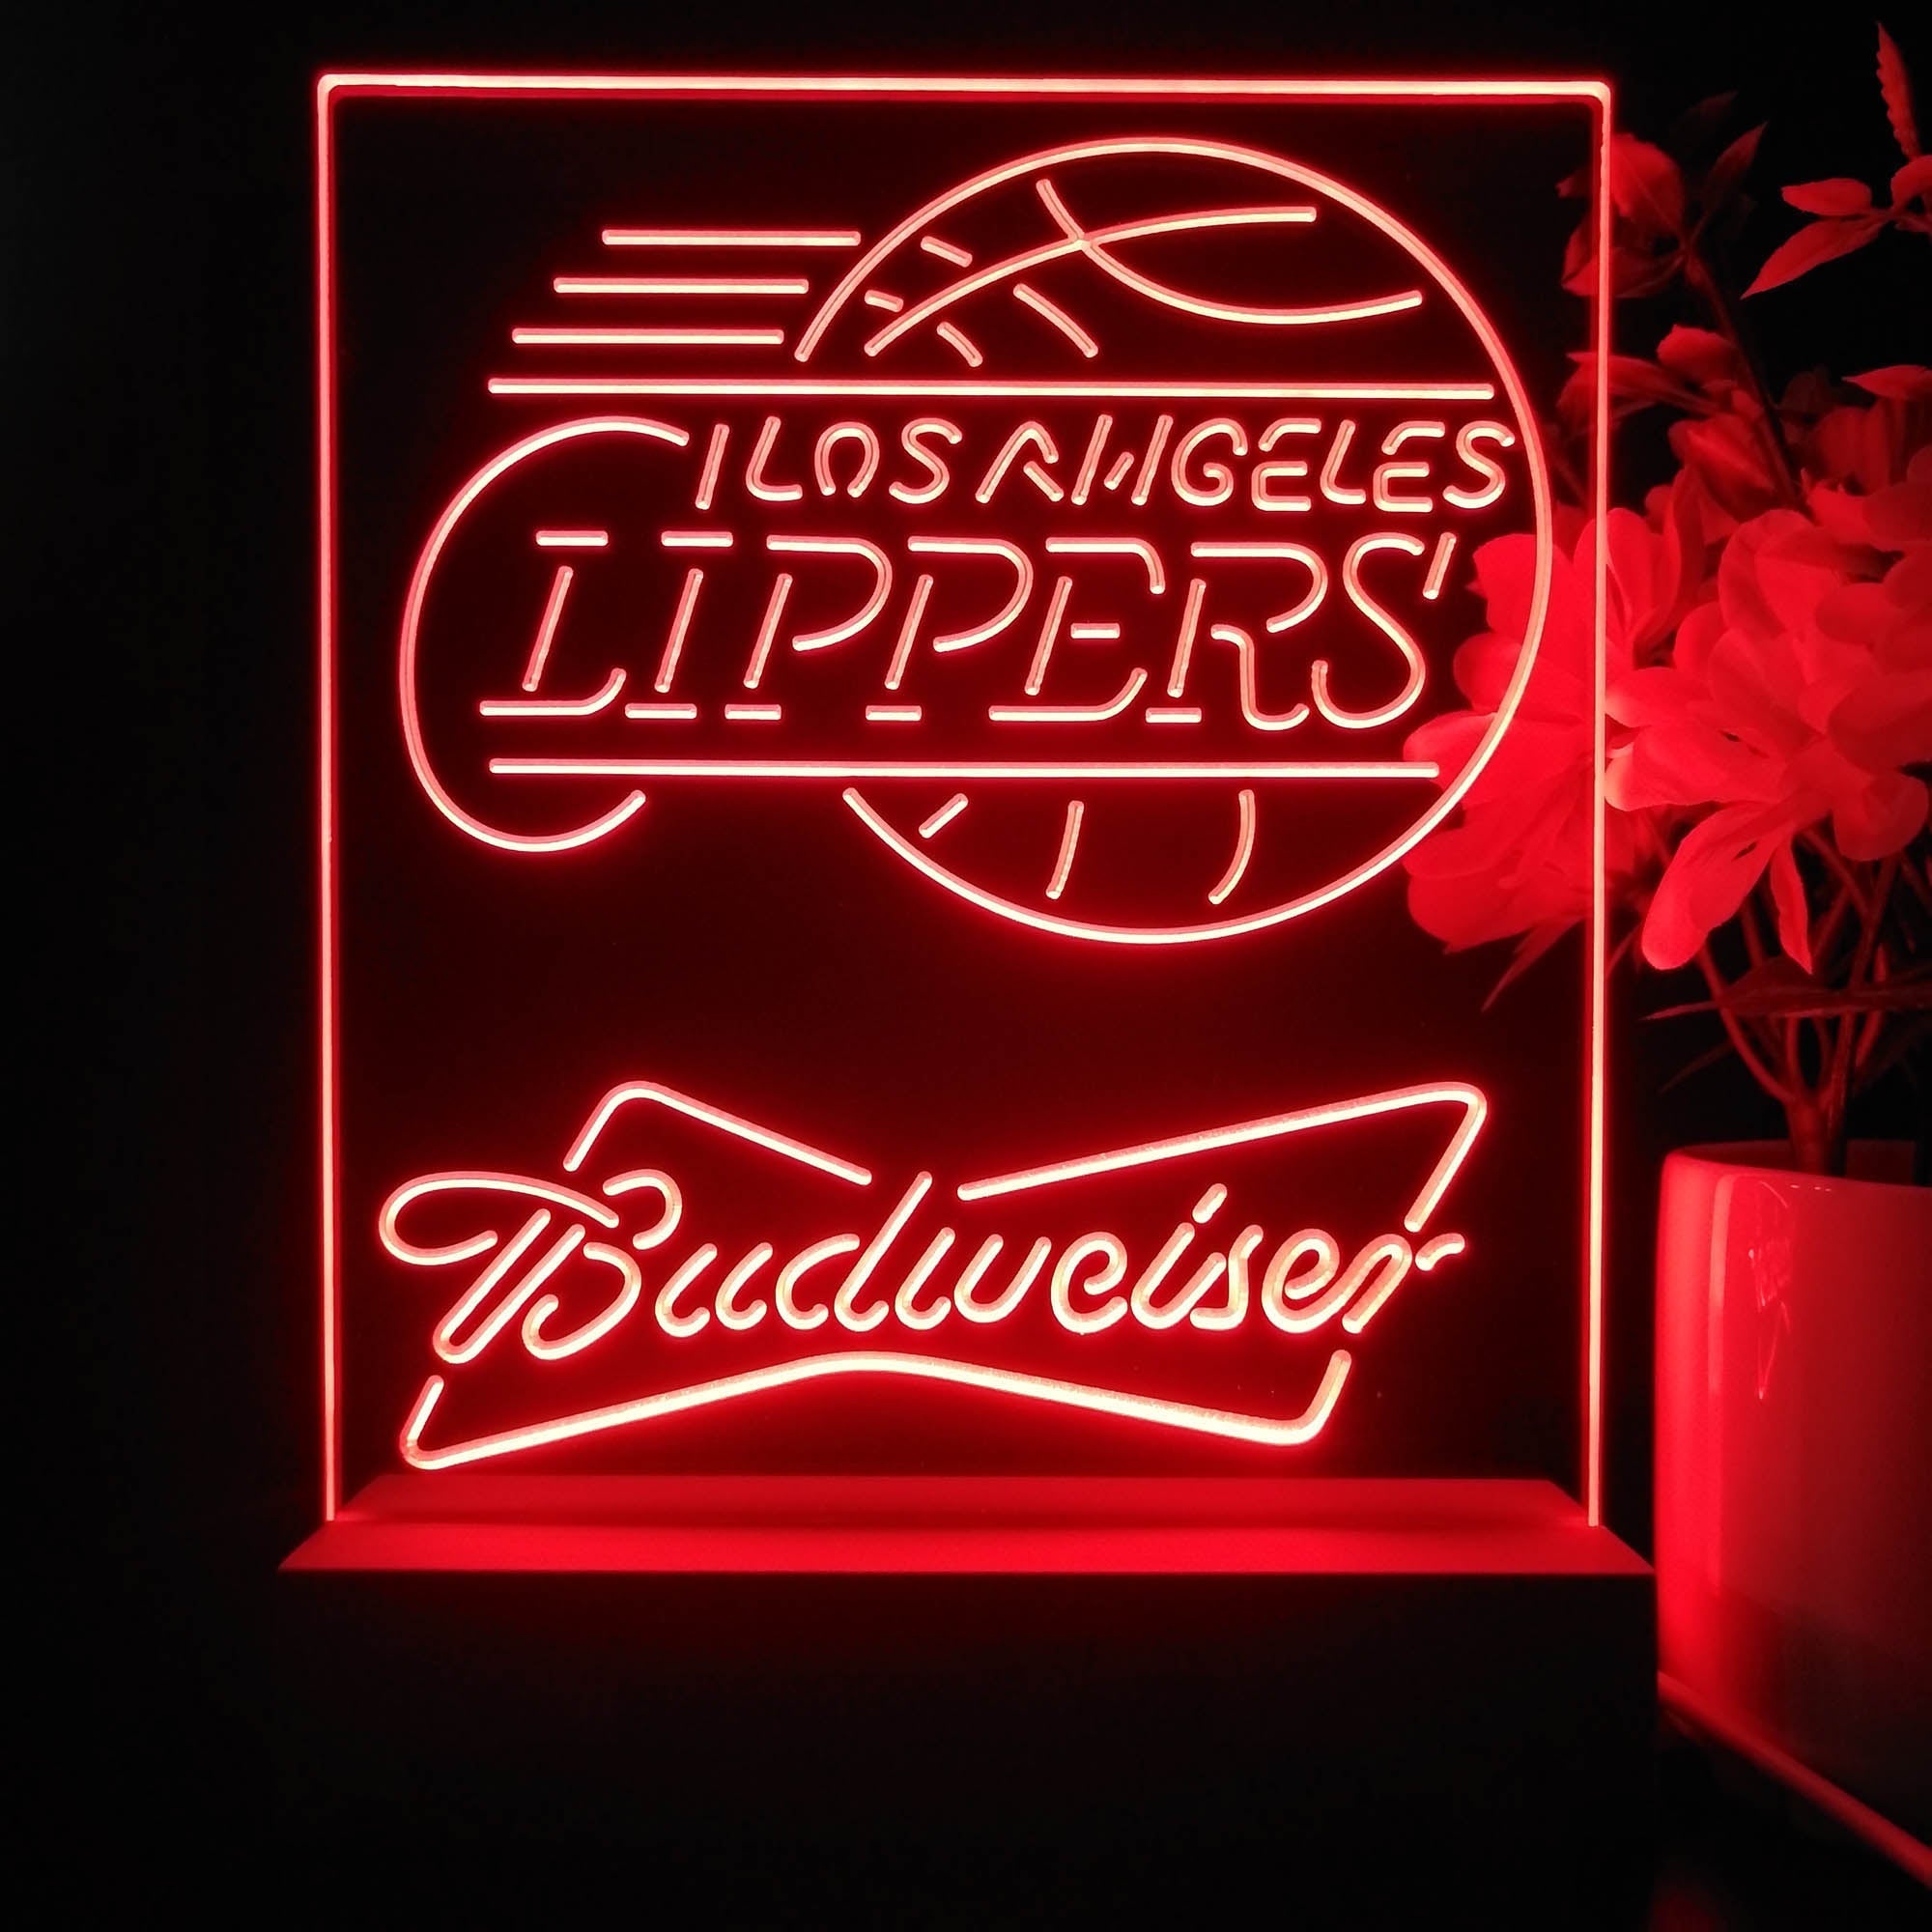 Los Angeles Clippers Budweiser Neon Sign Pub Bar Lamp